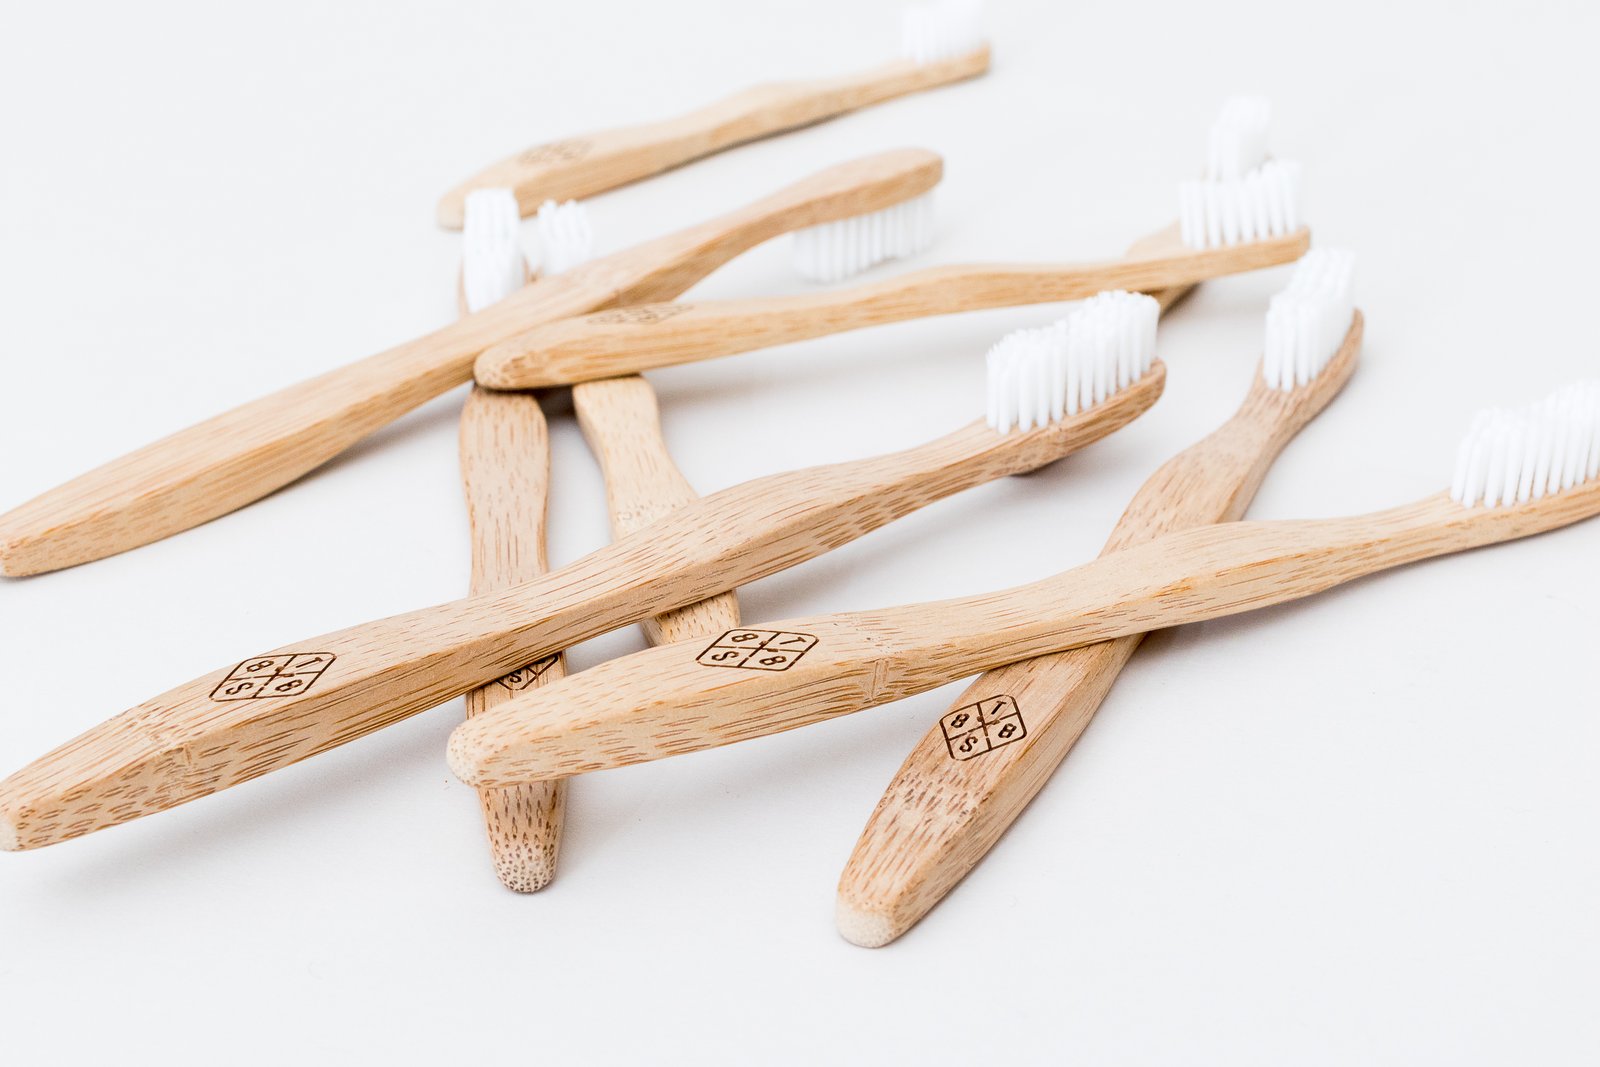 A sustainable bamboo toothbrush can be delivered to your home from The Bamboo Brush Society.*